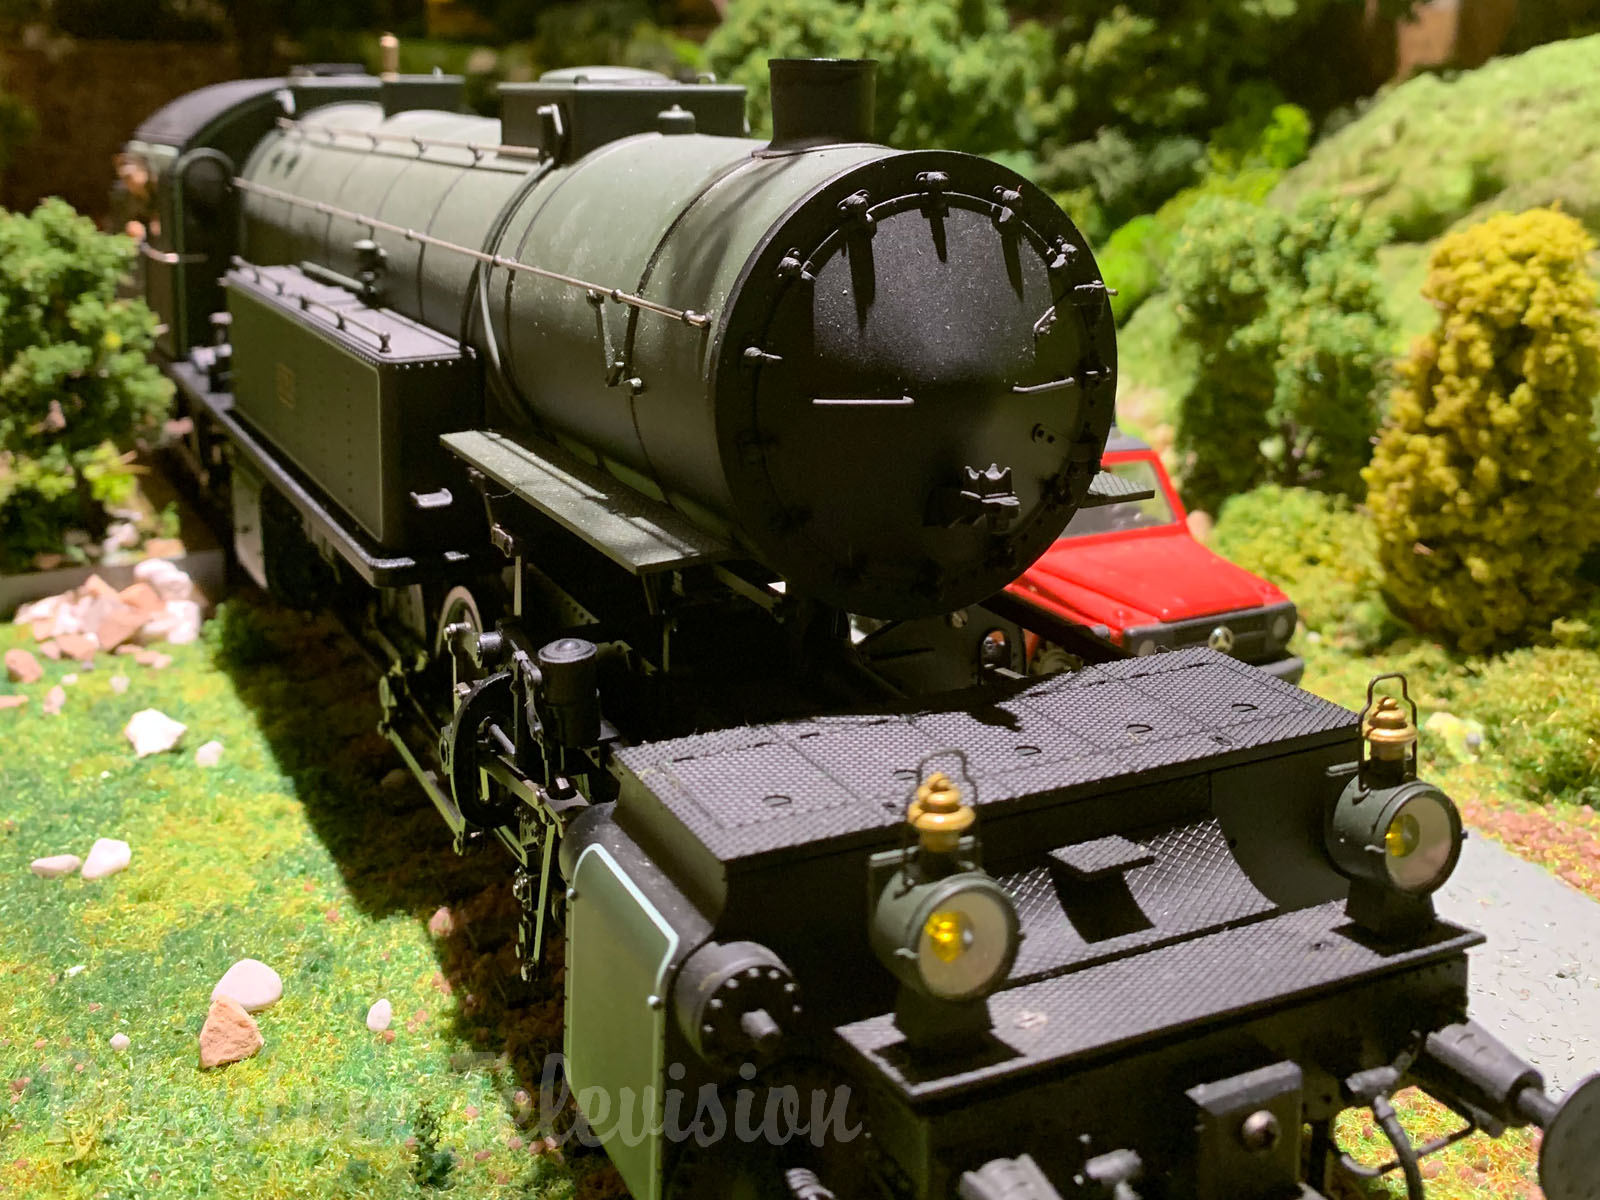 Model Railroading - Huffing, Puffing and Chuffing Steam Trains on Arnold’s Märklin Miniature Railway